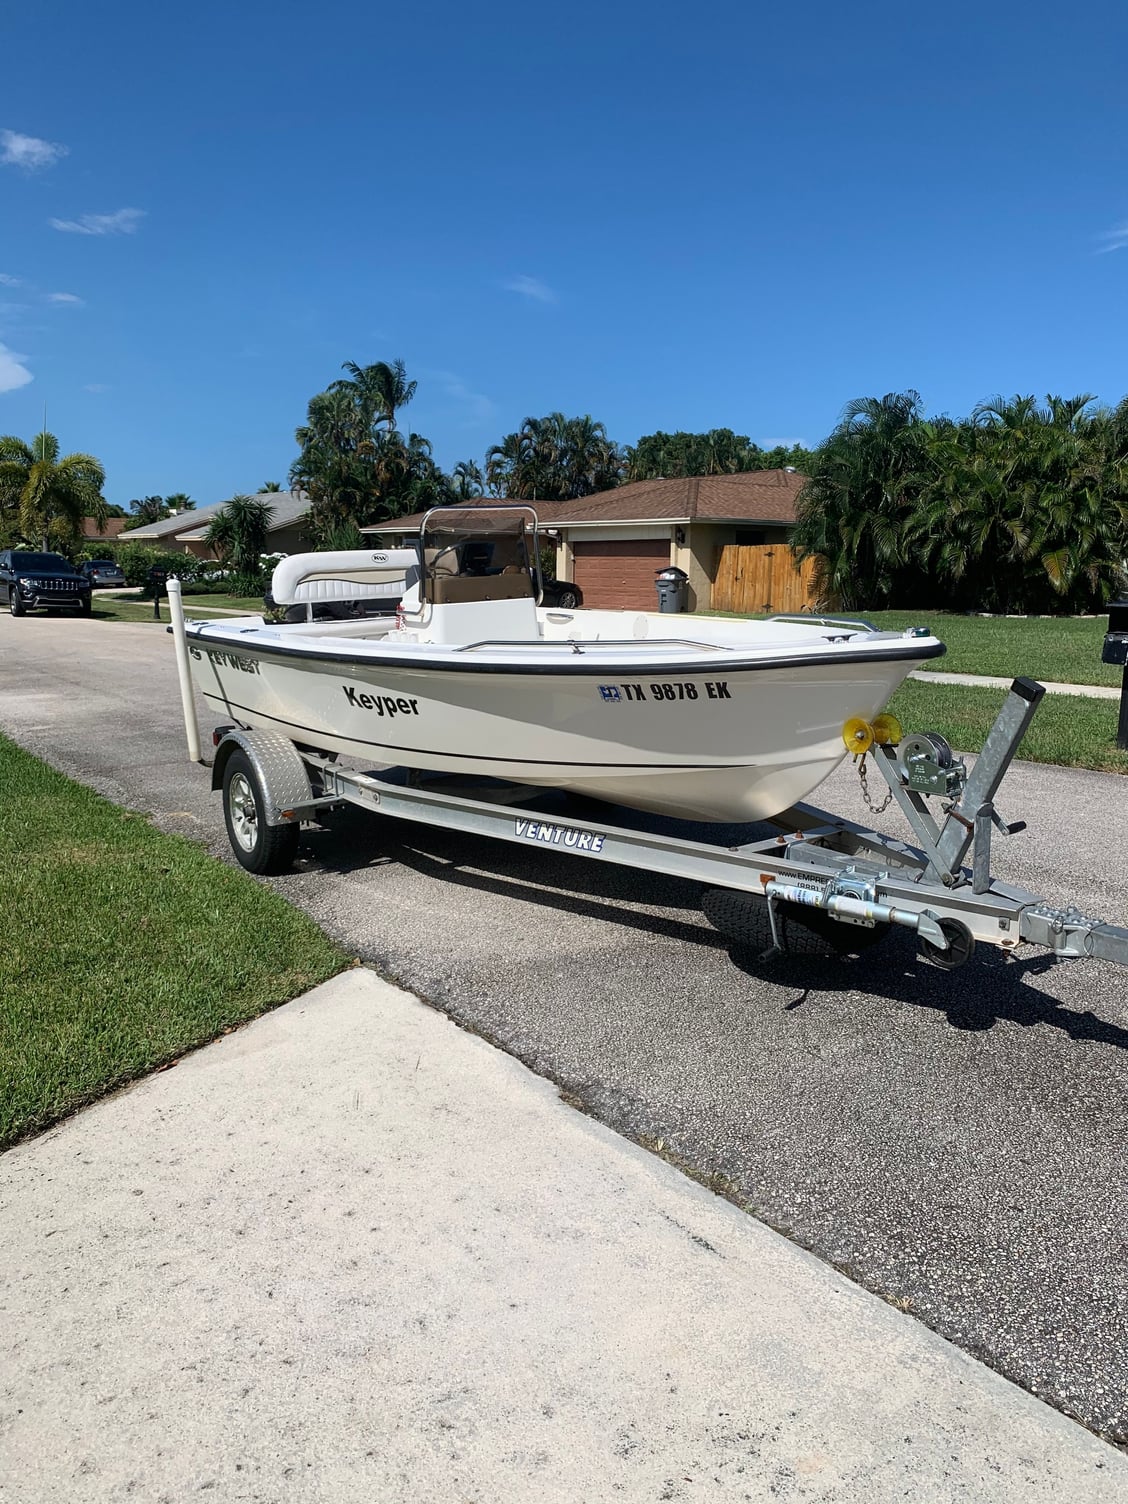 FS: 2009 Keywest 1520 Sportsman - The Hull Truth - Boating and Fishing Forum